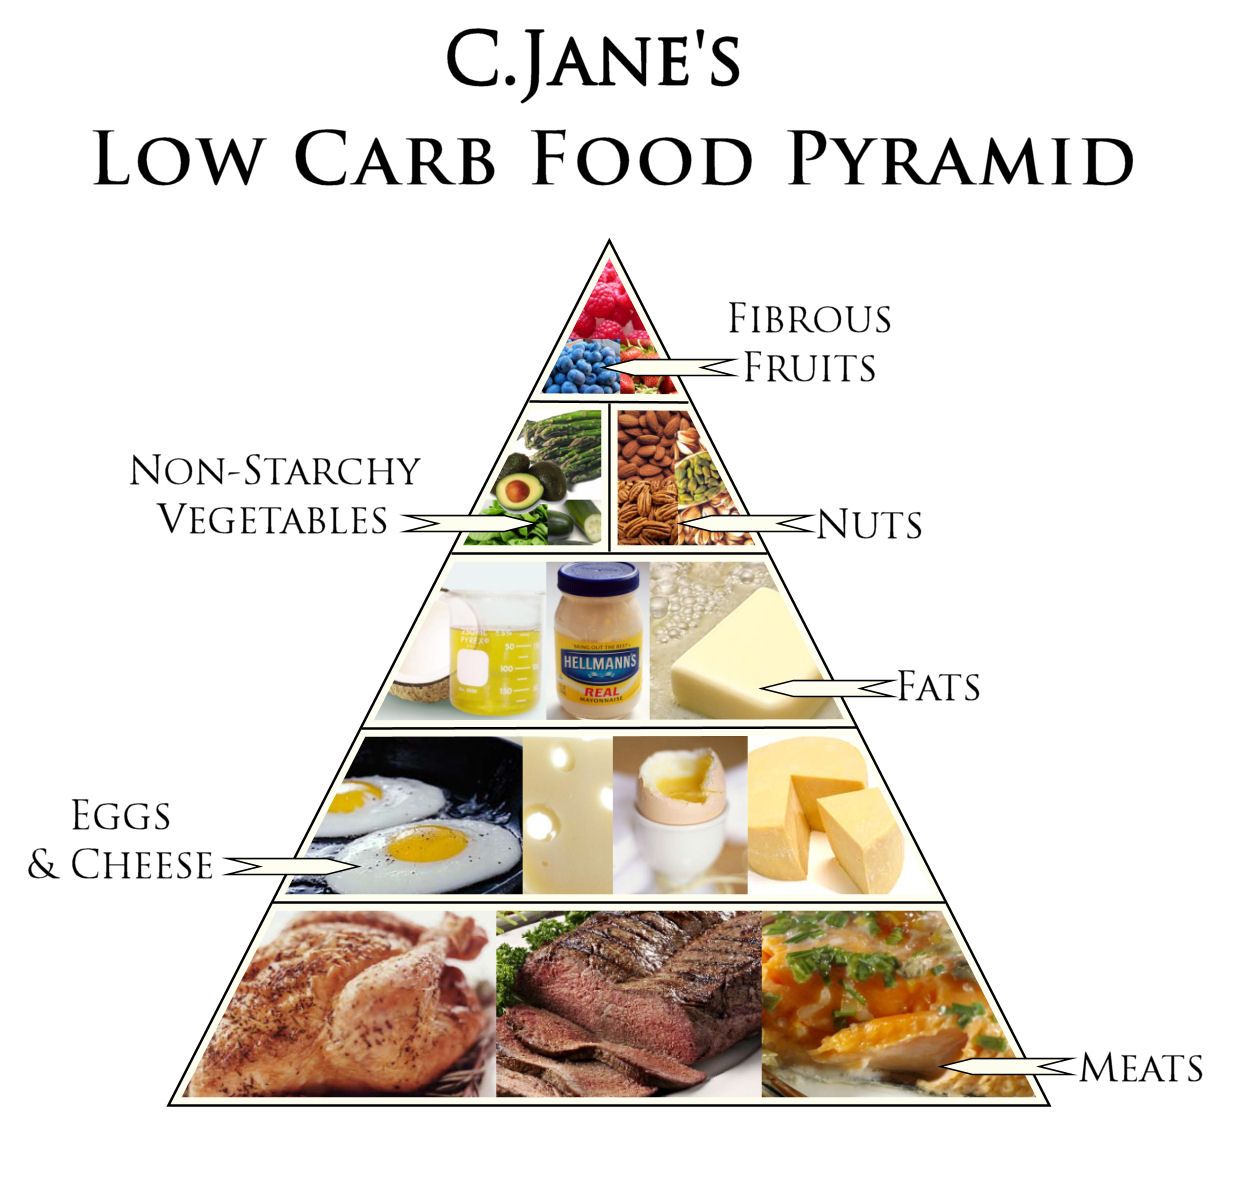 High Protein, High Fat, Low Carb Food Pyramid